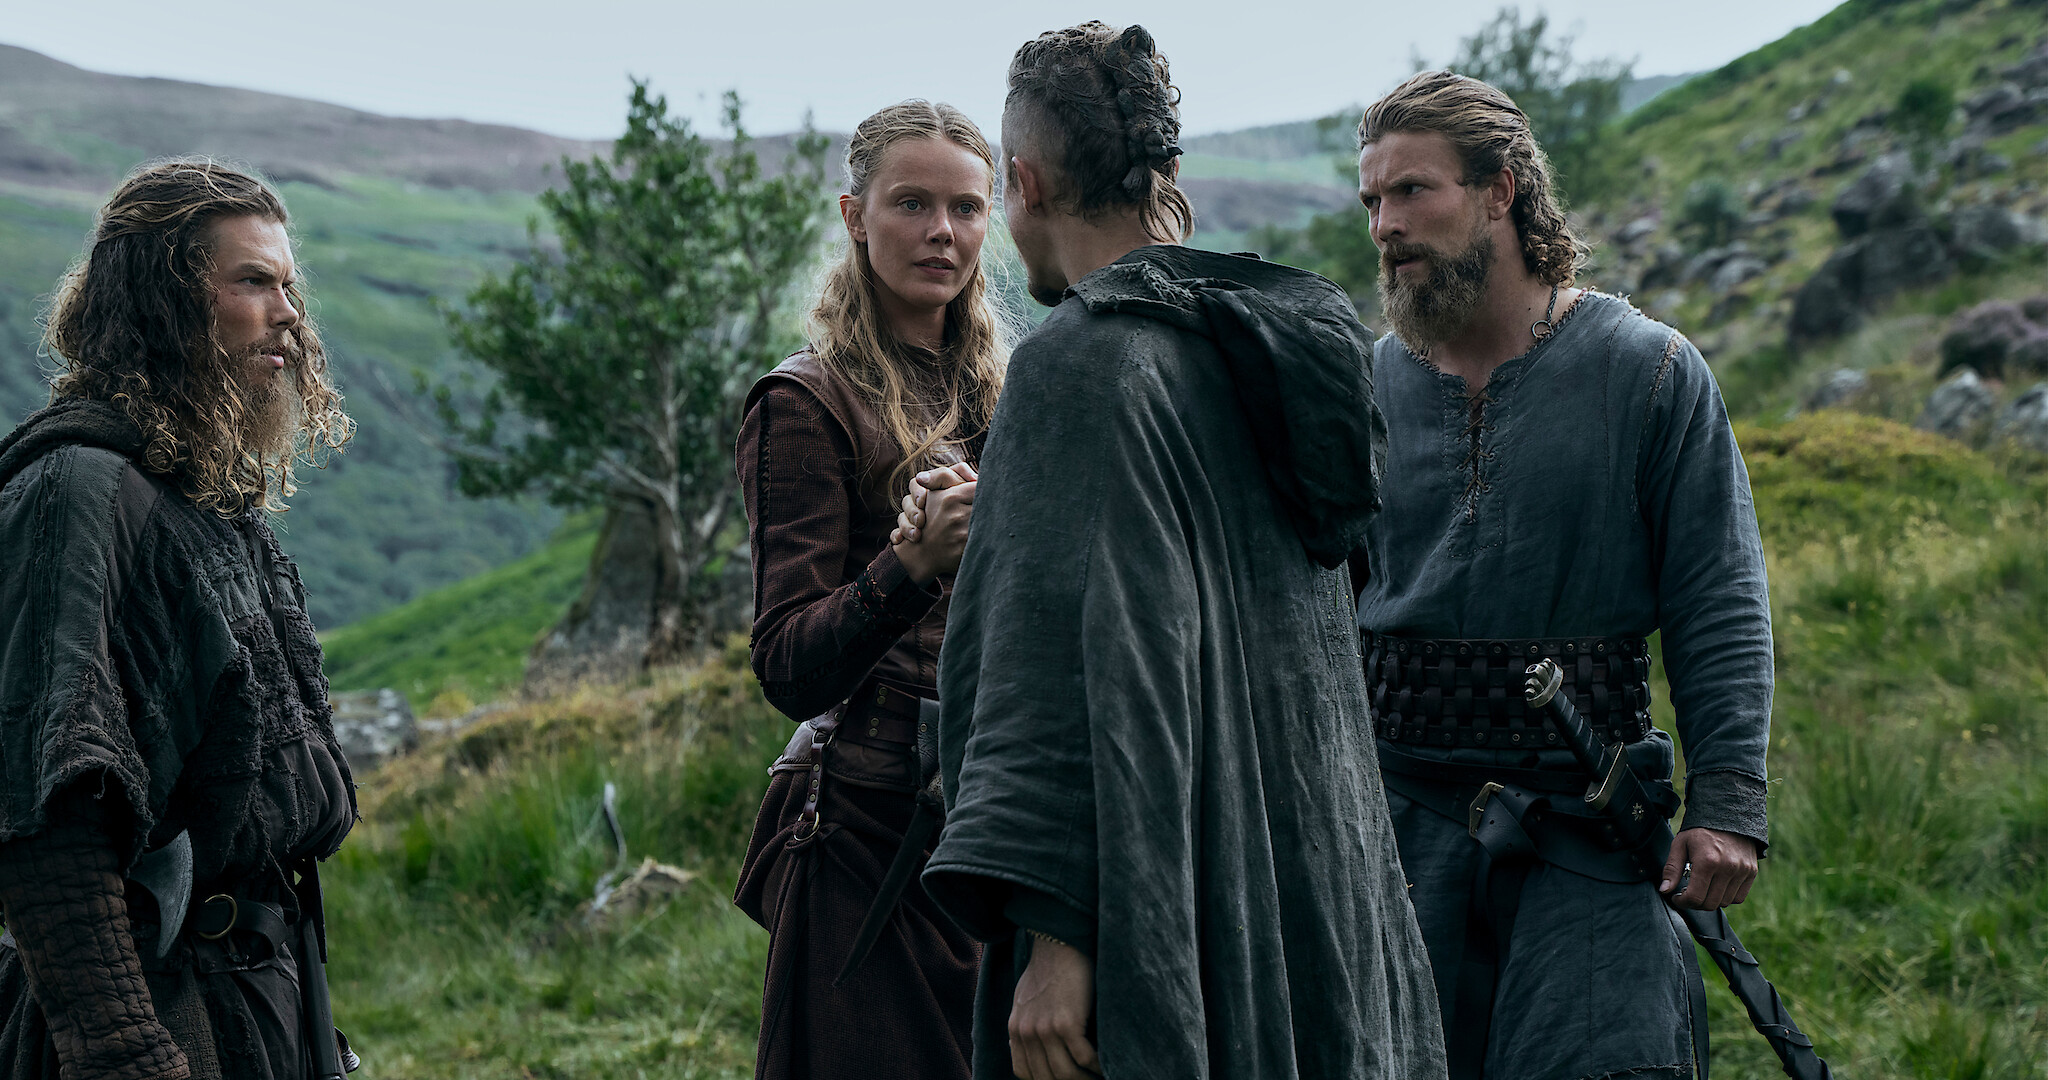 Vikings Valhalla cast, Full list of characters in Netflix series